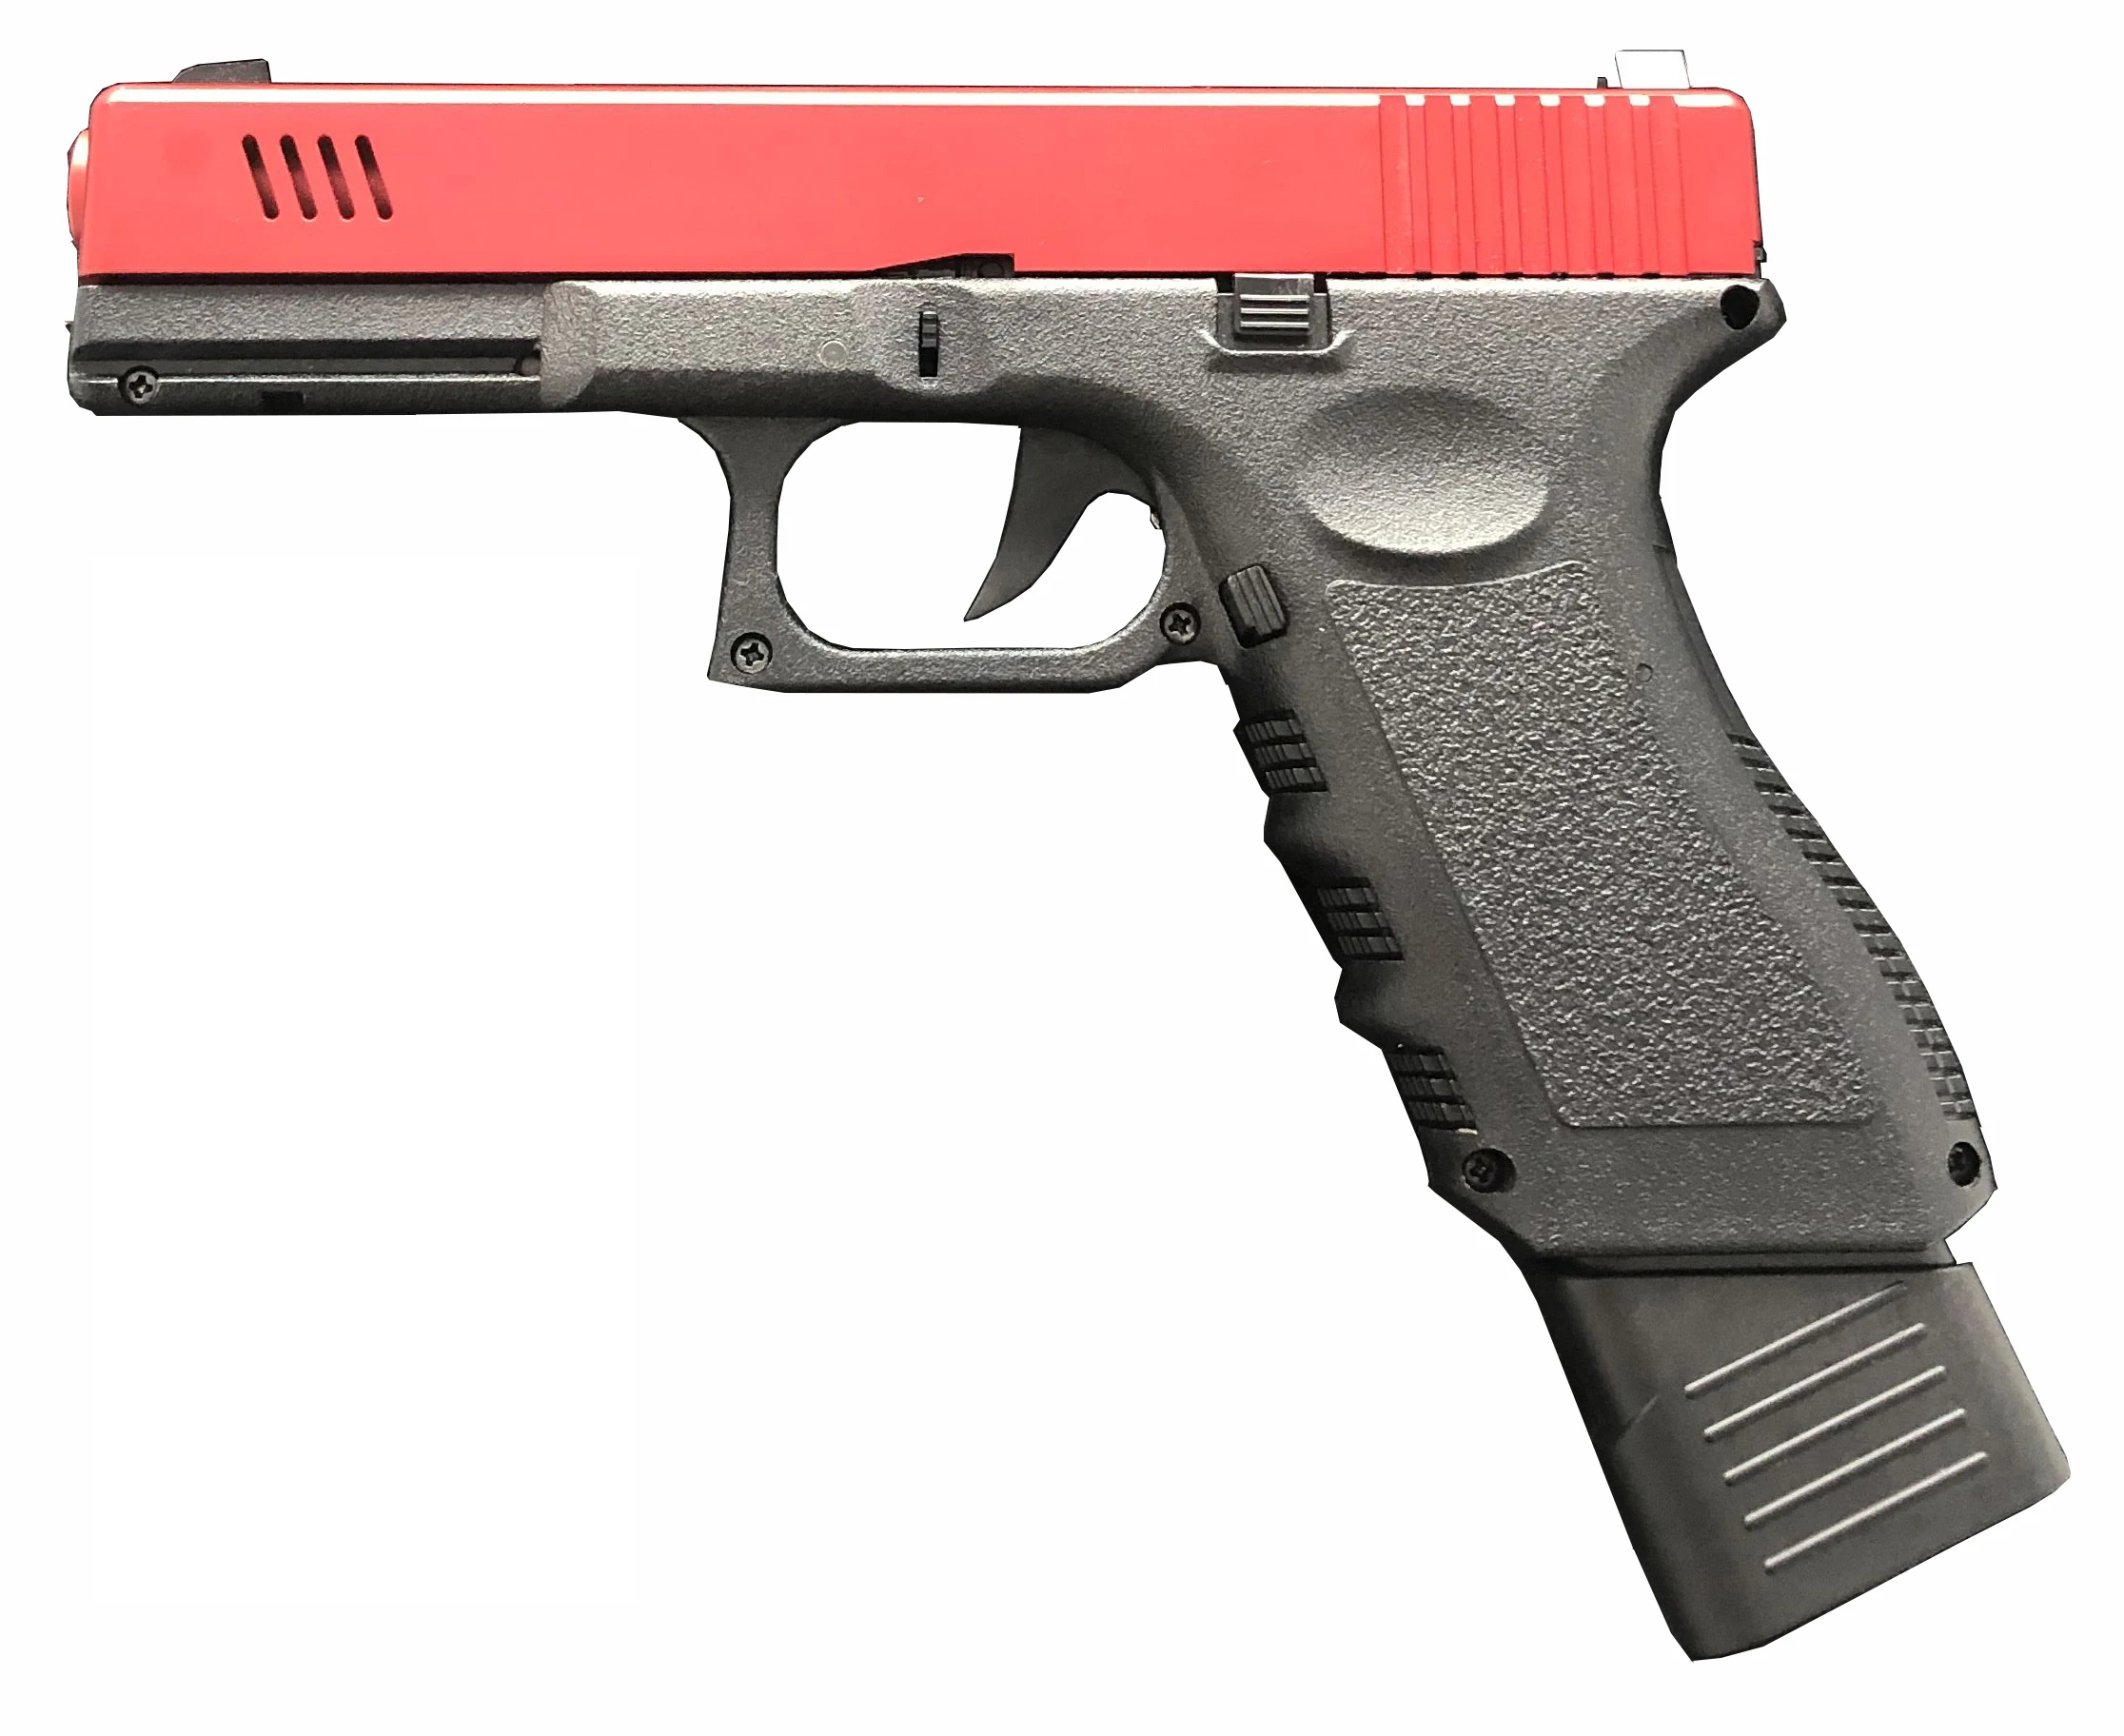 

Electric recoil L17 Laser Pistol for IPSC Shooting Training